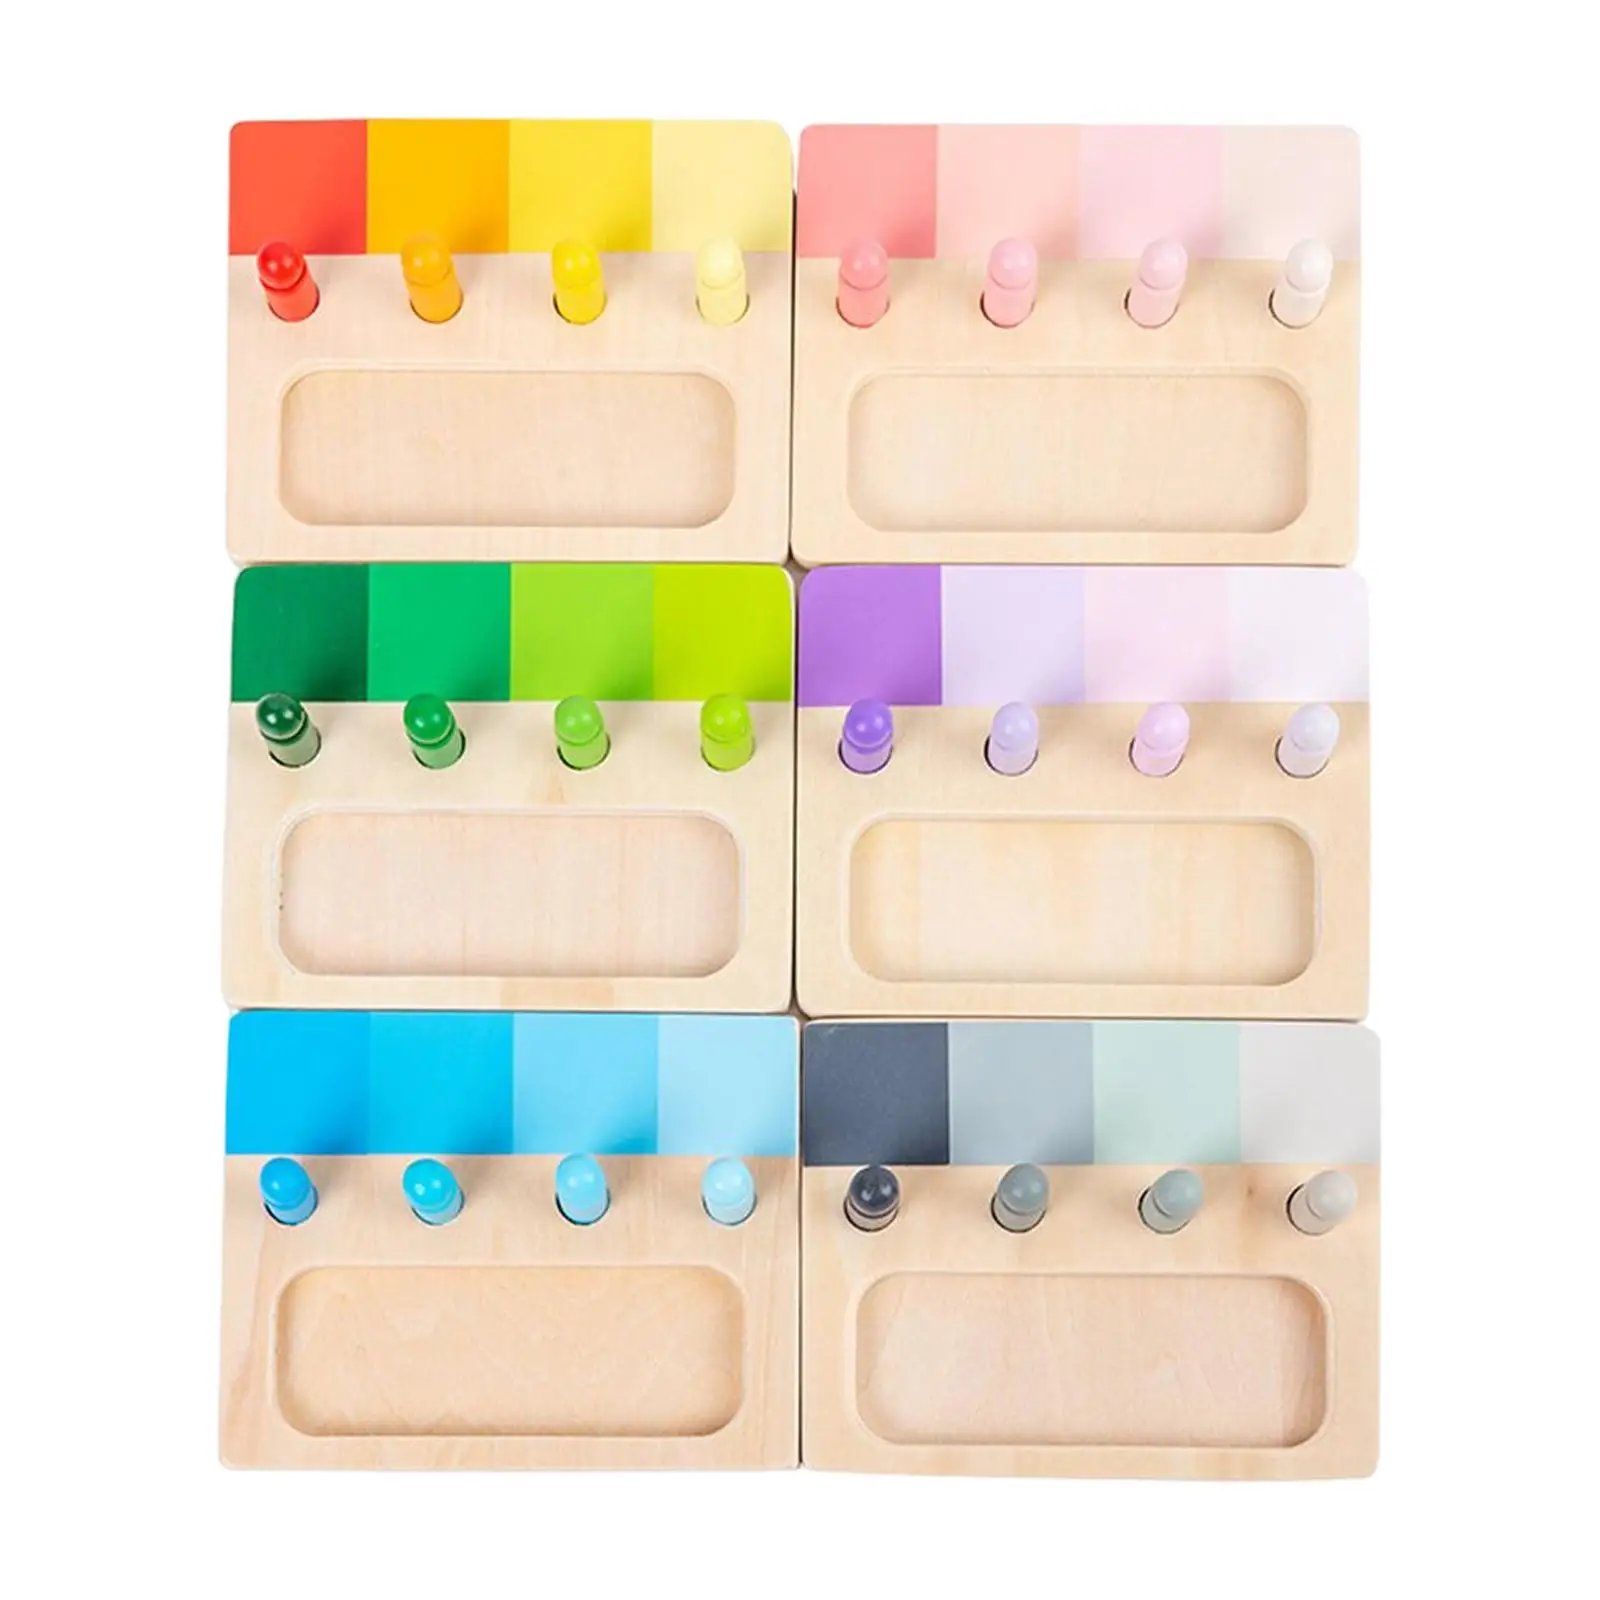 6 Pieces Educational Color Resemblance Sorting Task with Chess Early Learning